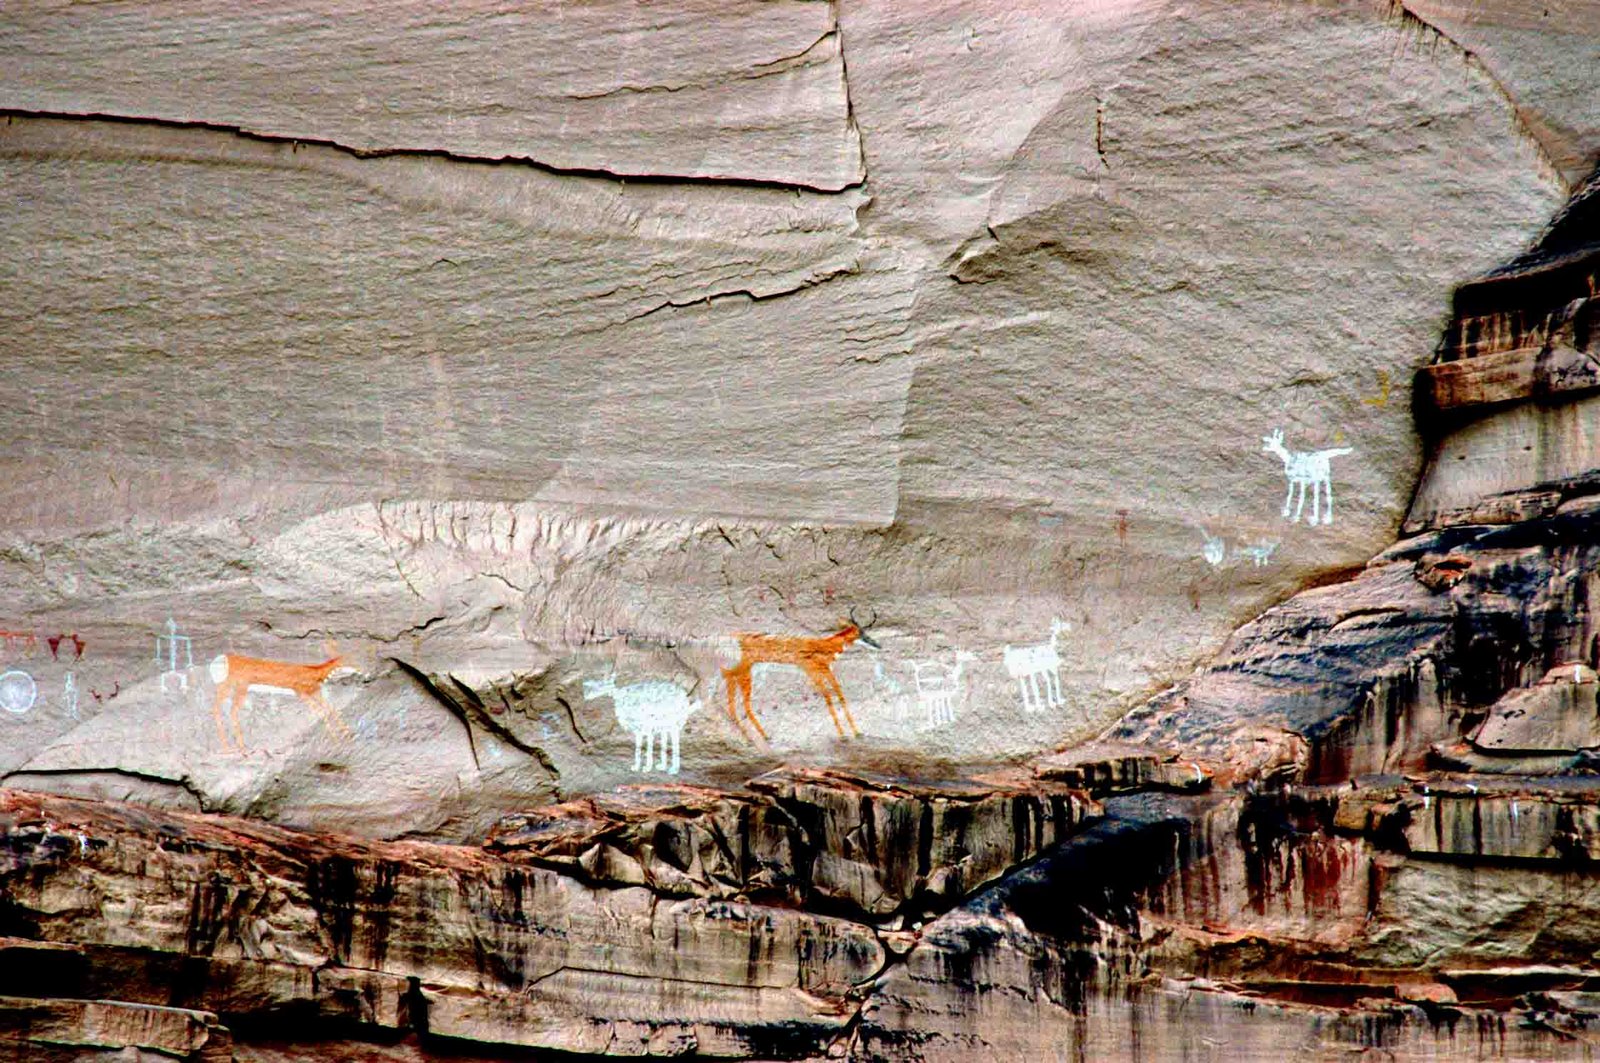 [Canyon+de+Chelly+Pictographs+low+res.jpg]